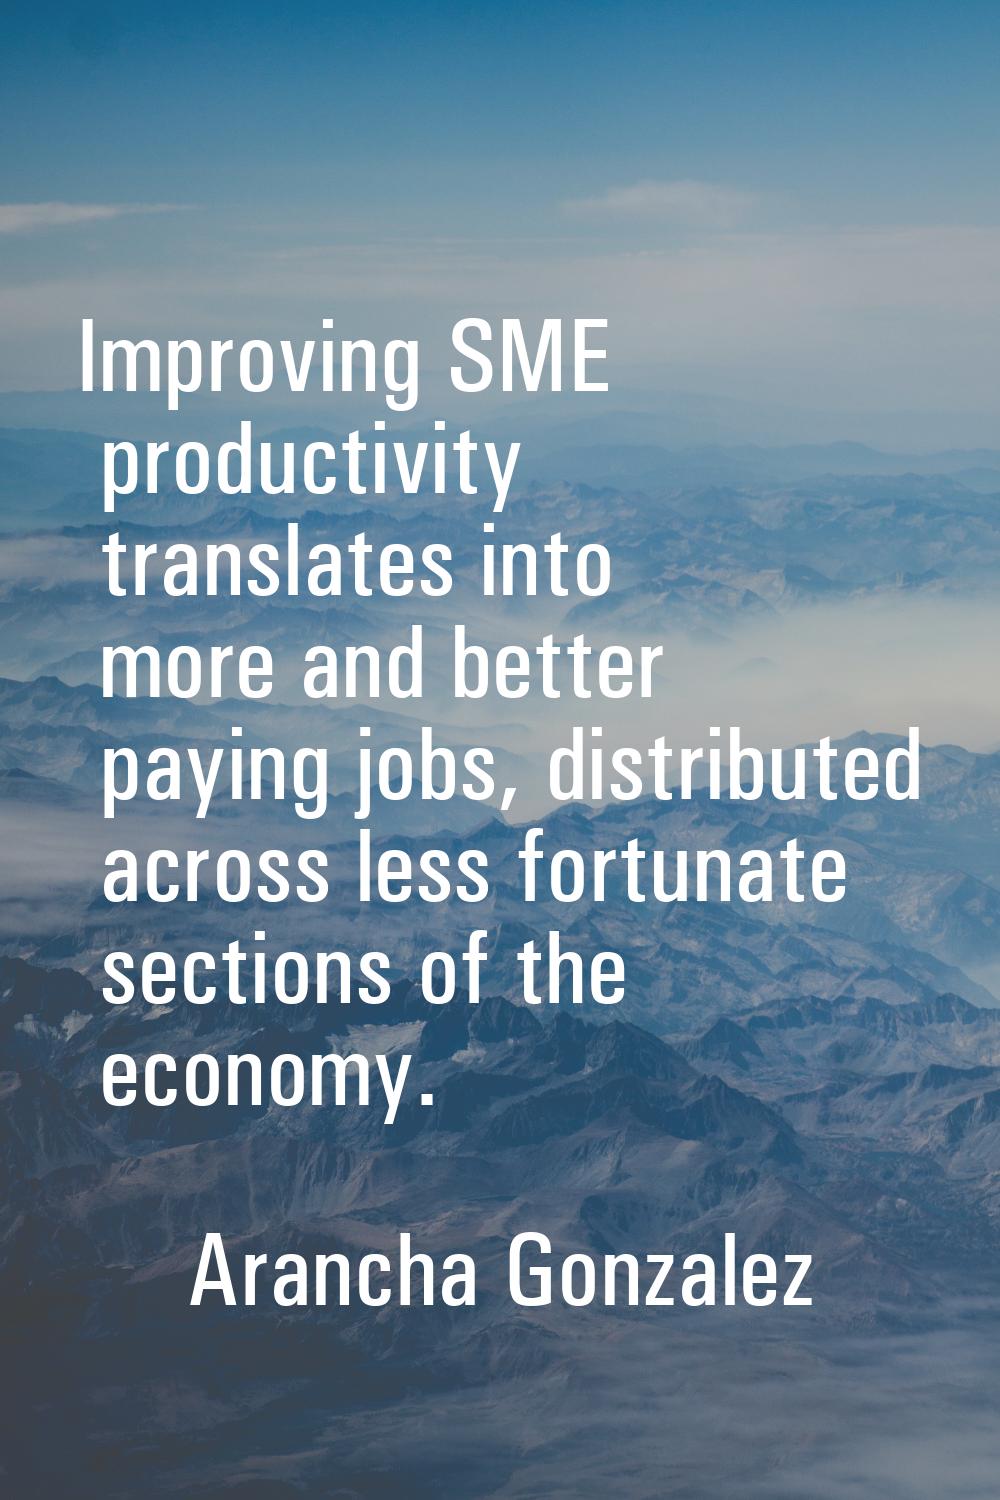 Improving SME productivity translates into more and better paying jobs, distributed across less for